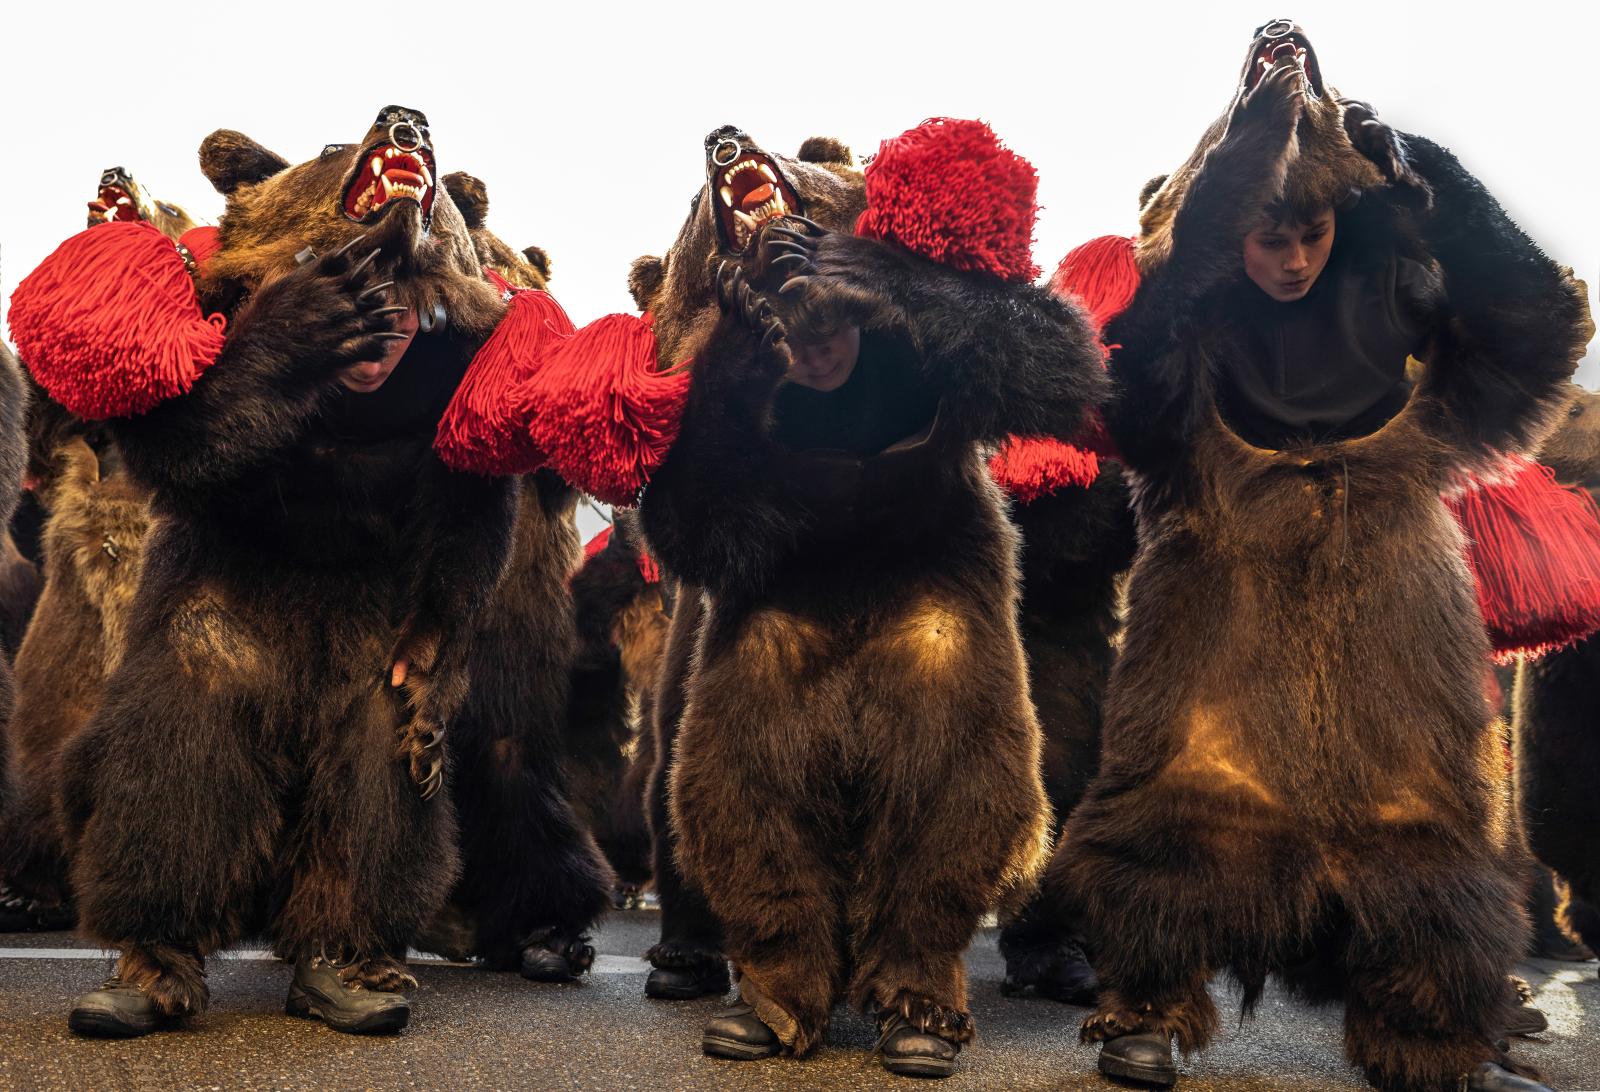 The Dance of the Bears. Youth dressed in bear hides dancing.